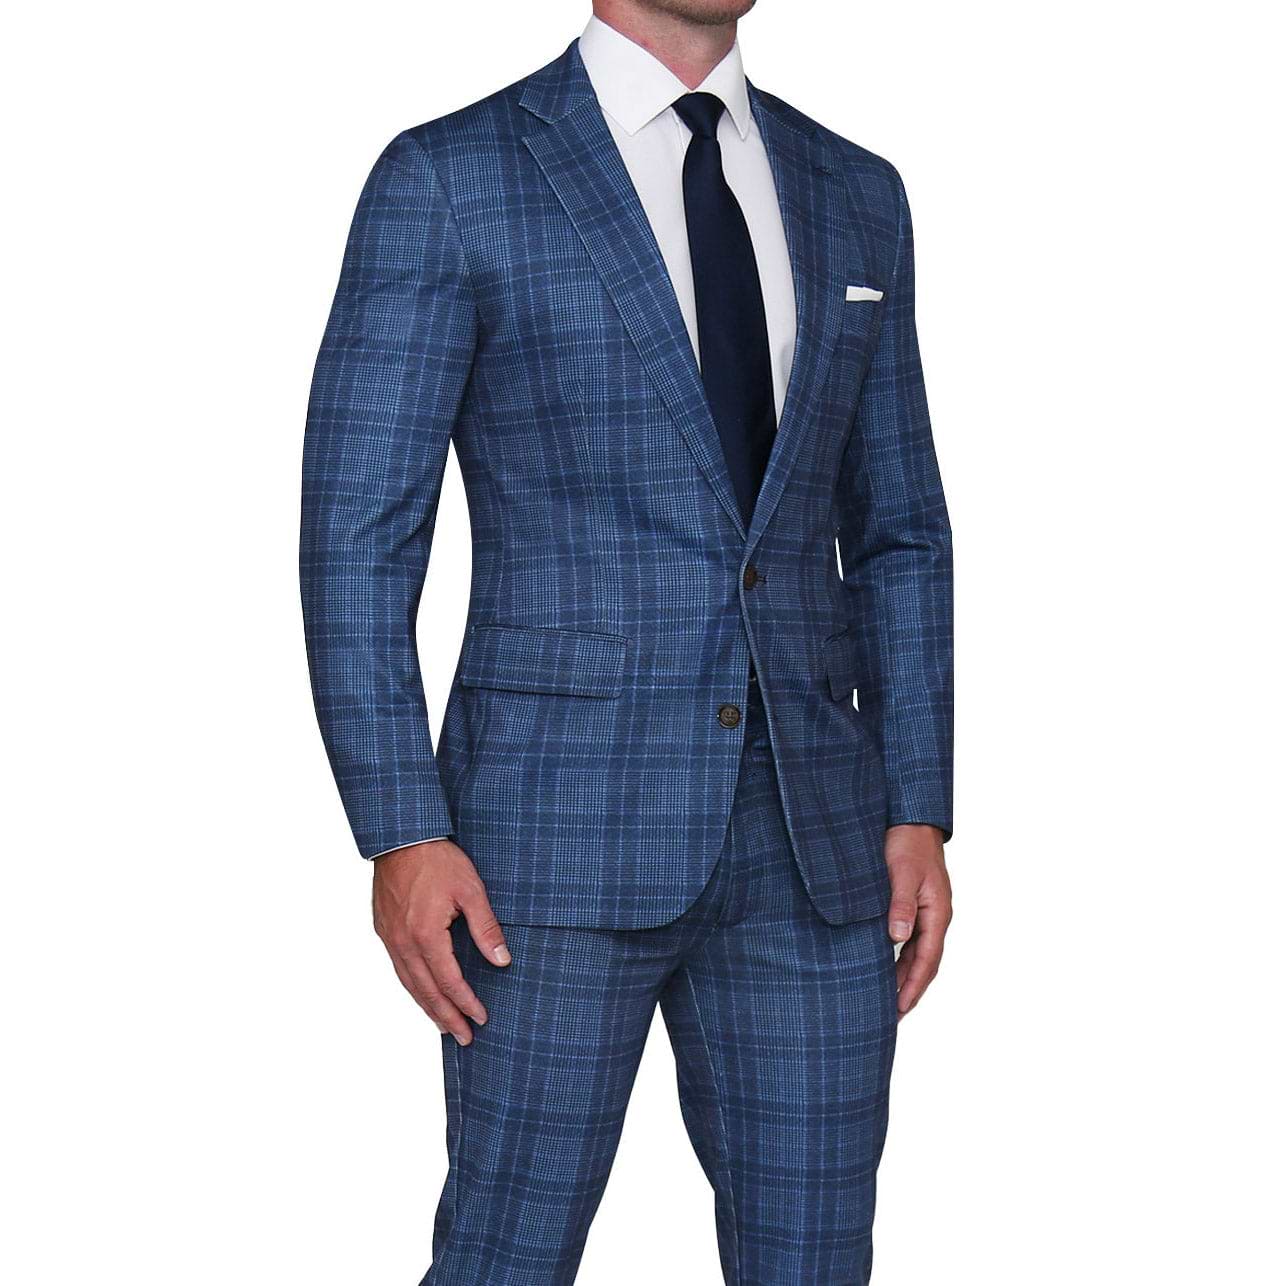 Athletic Fit Stretch Blazer - Navy and Light Electric Blue Plaid